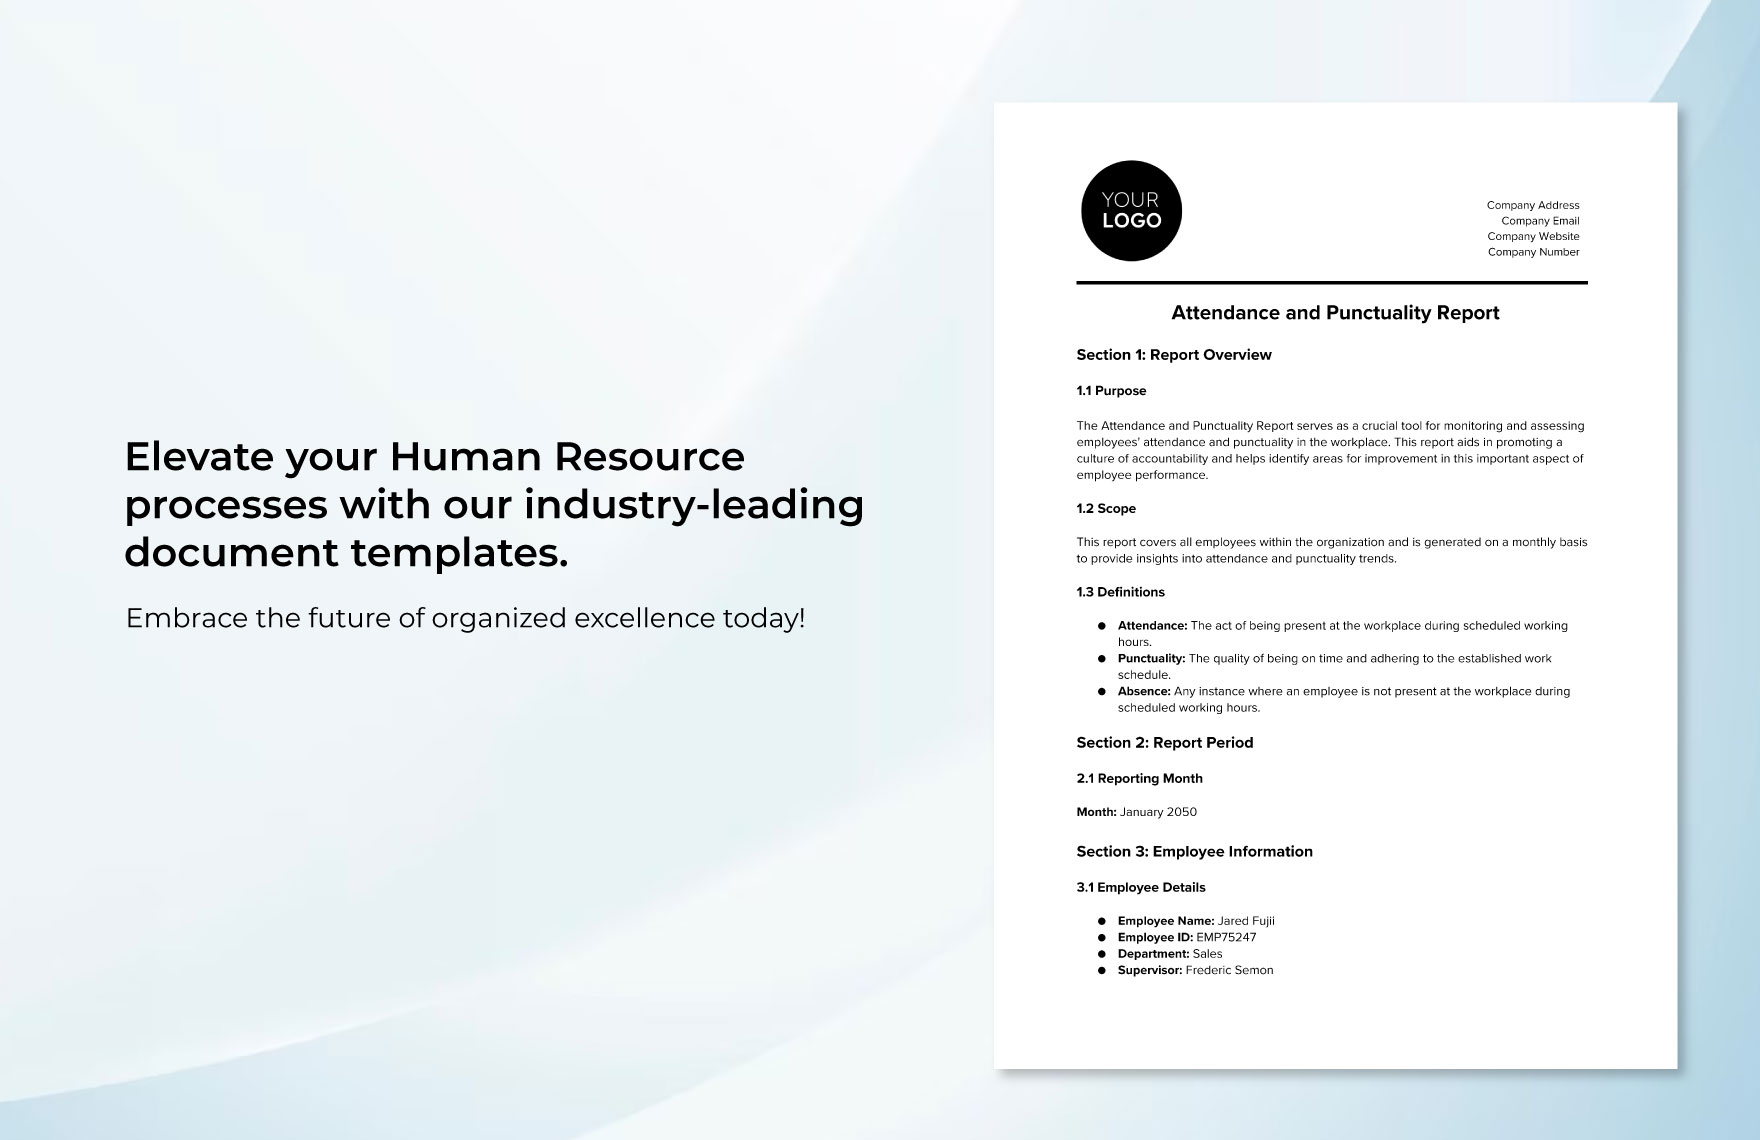 Attendance and Punctuality Report HR Template